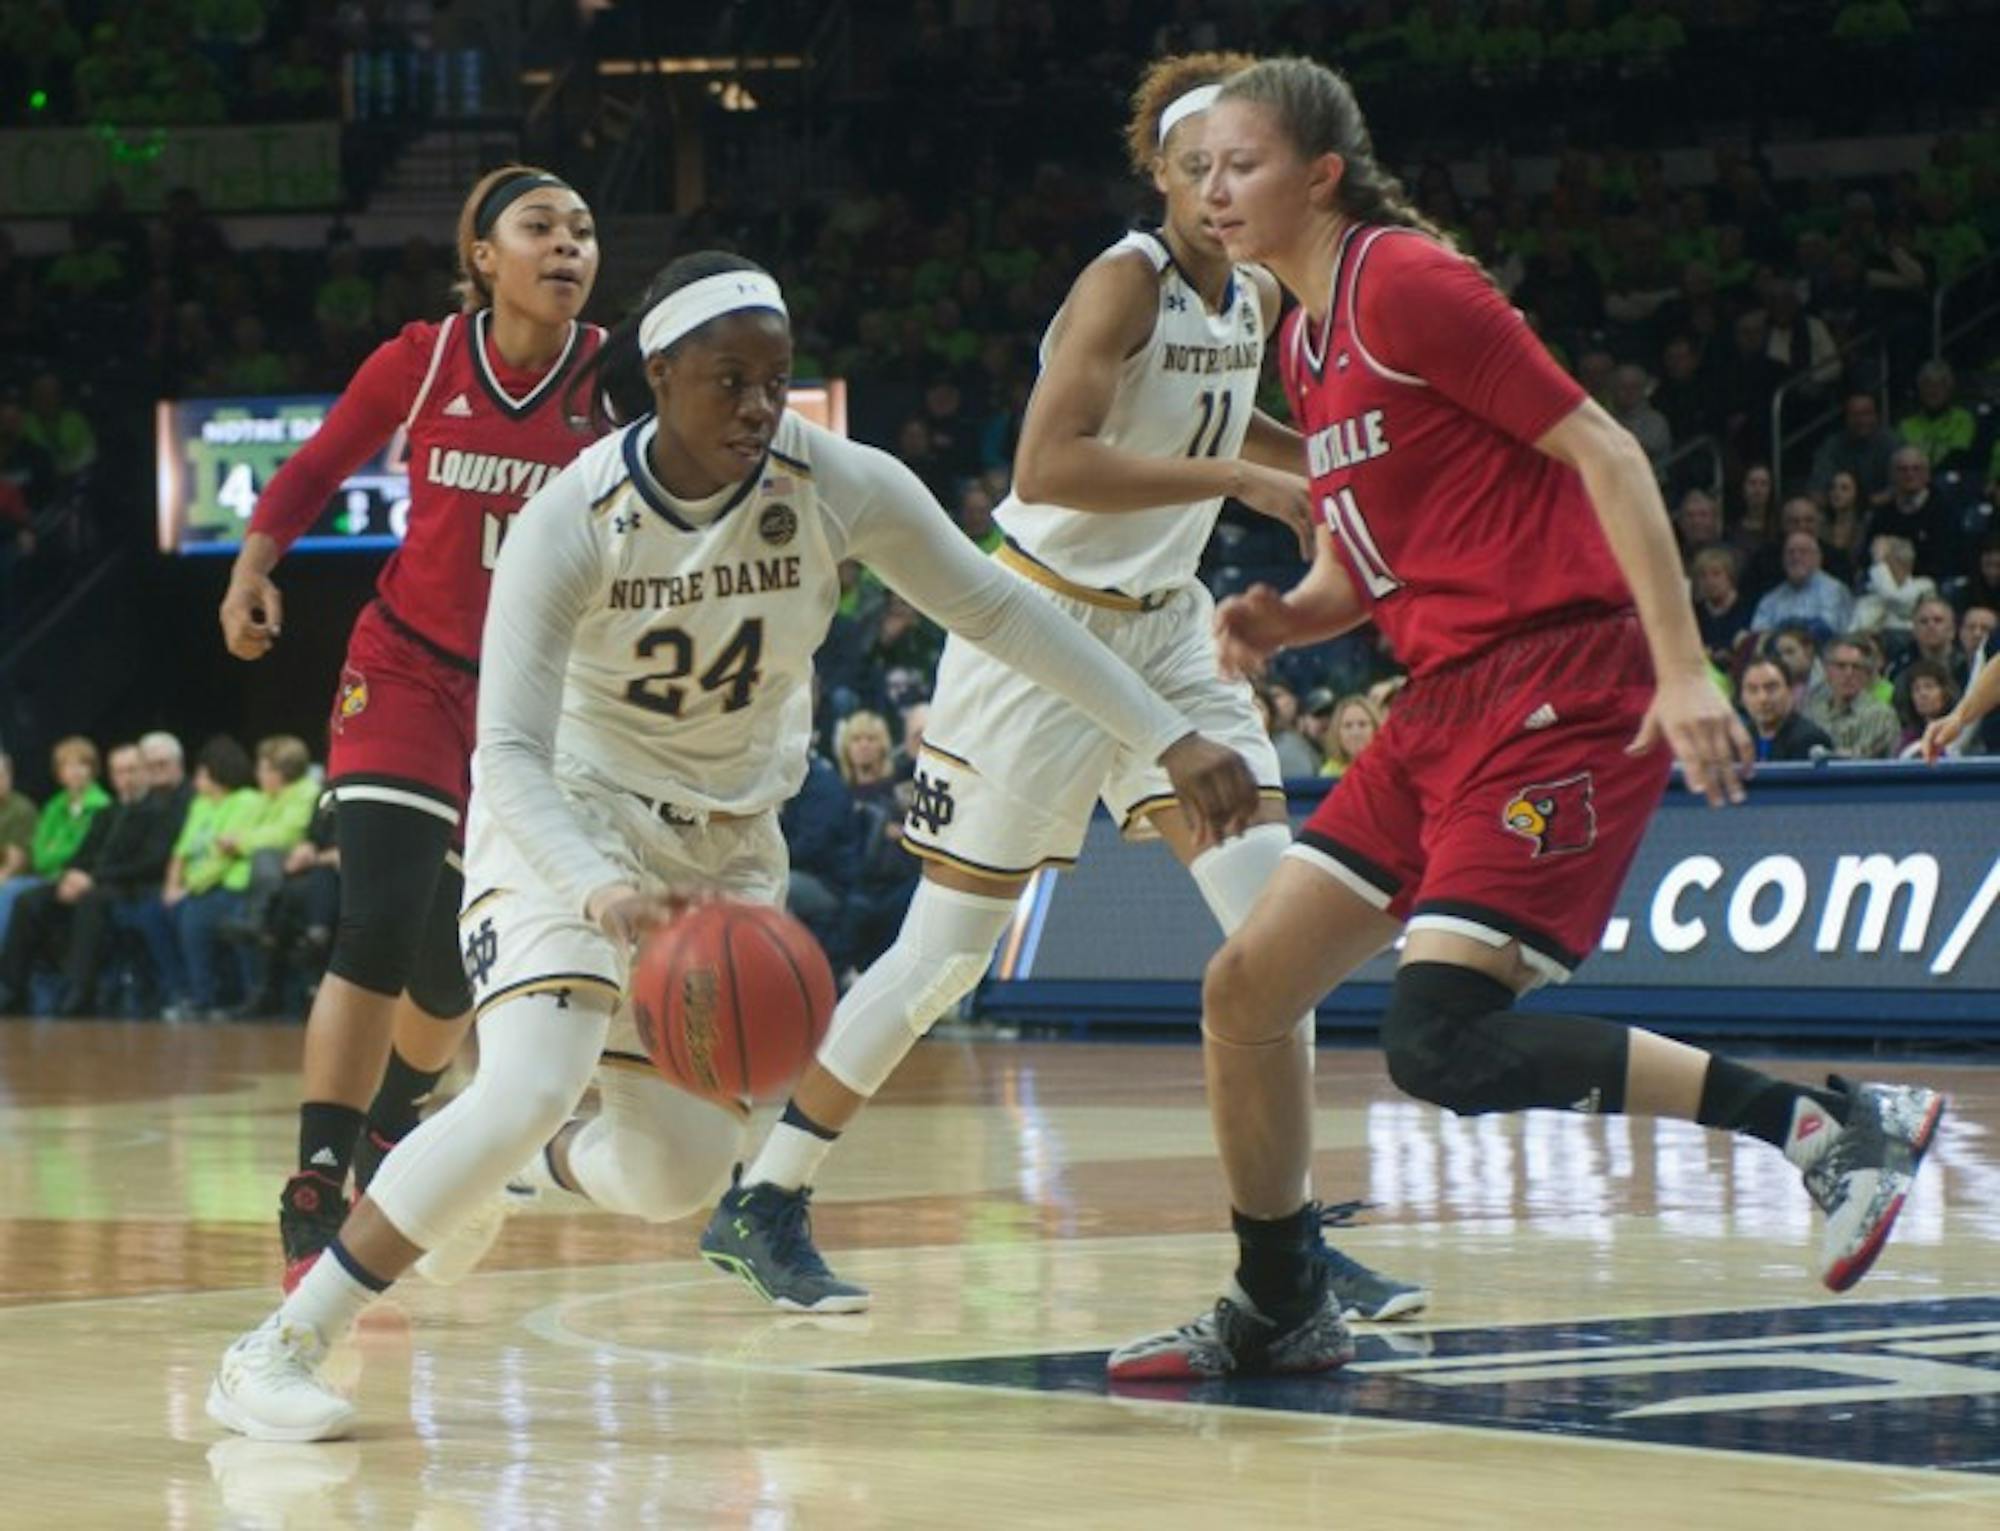 Irish sophomore guard Arike Ogunbowale drives into the lane during Notre Dame’s 85-66 win over Louisville on Monday at Purcell Pavilion.